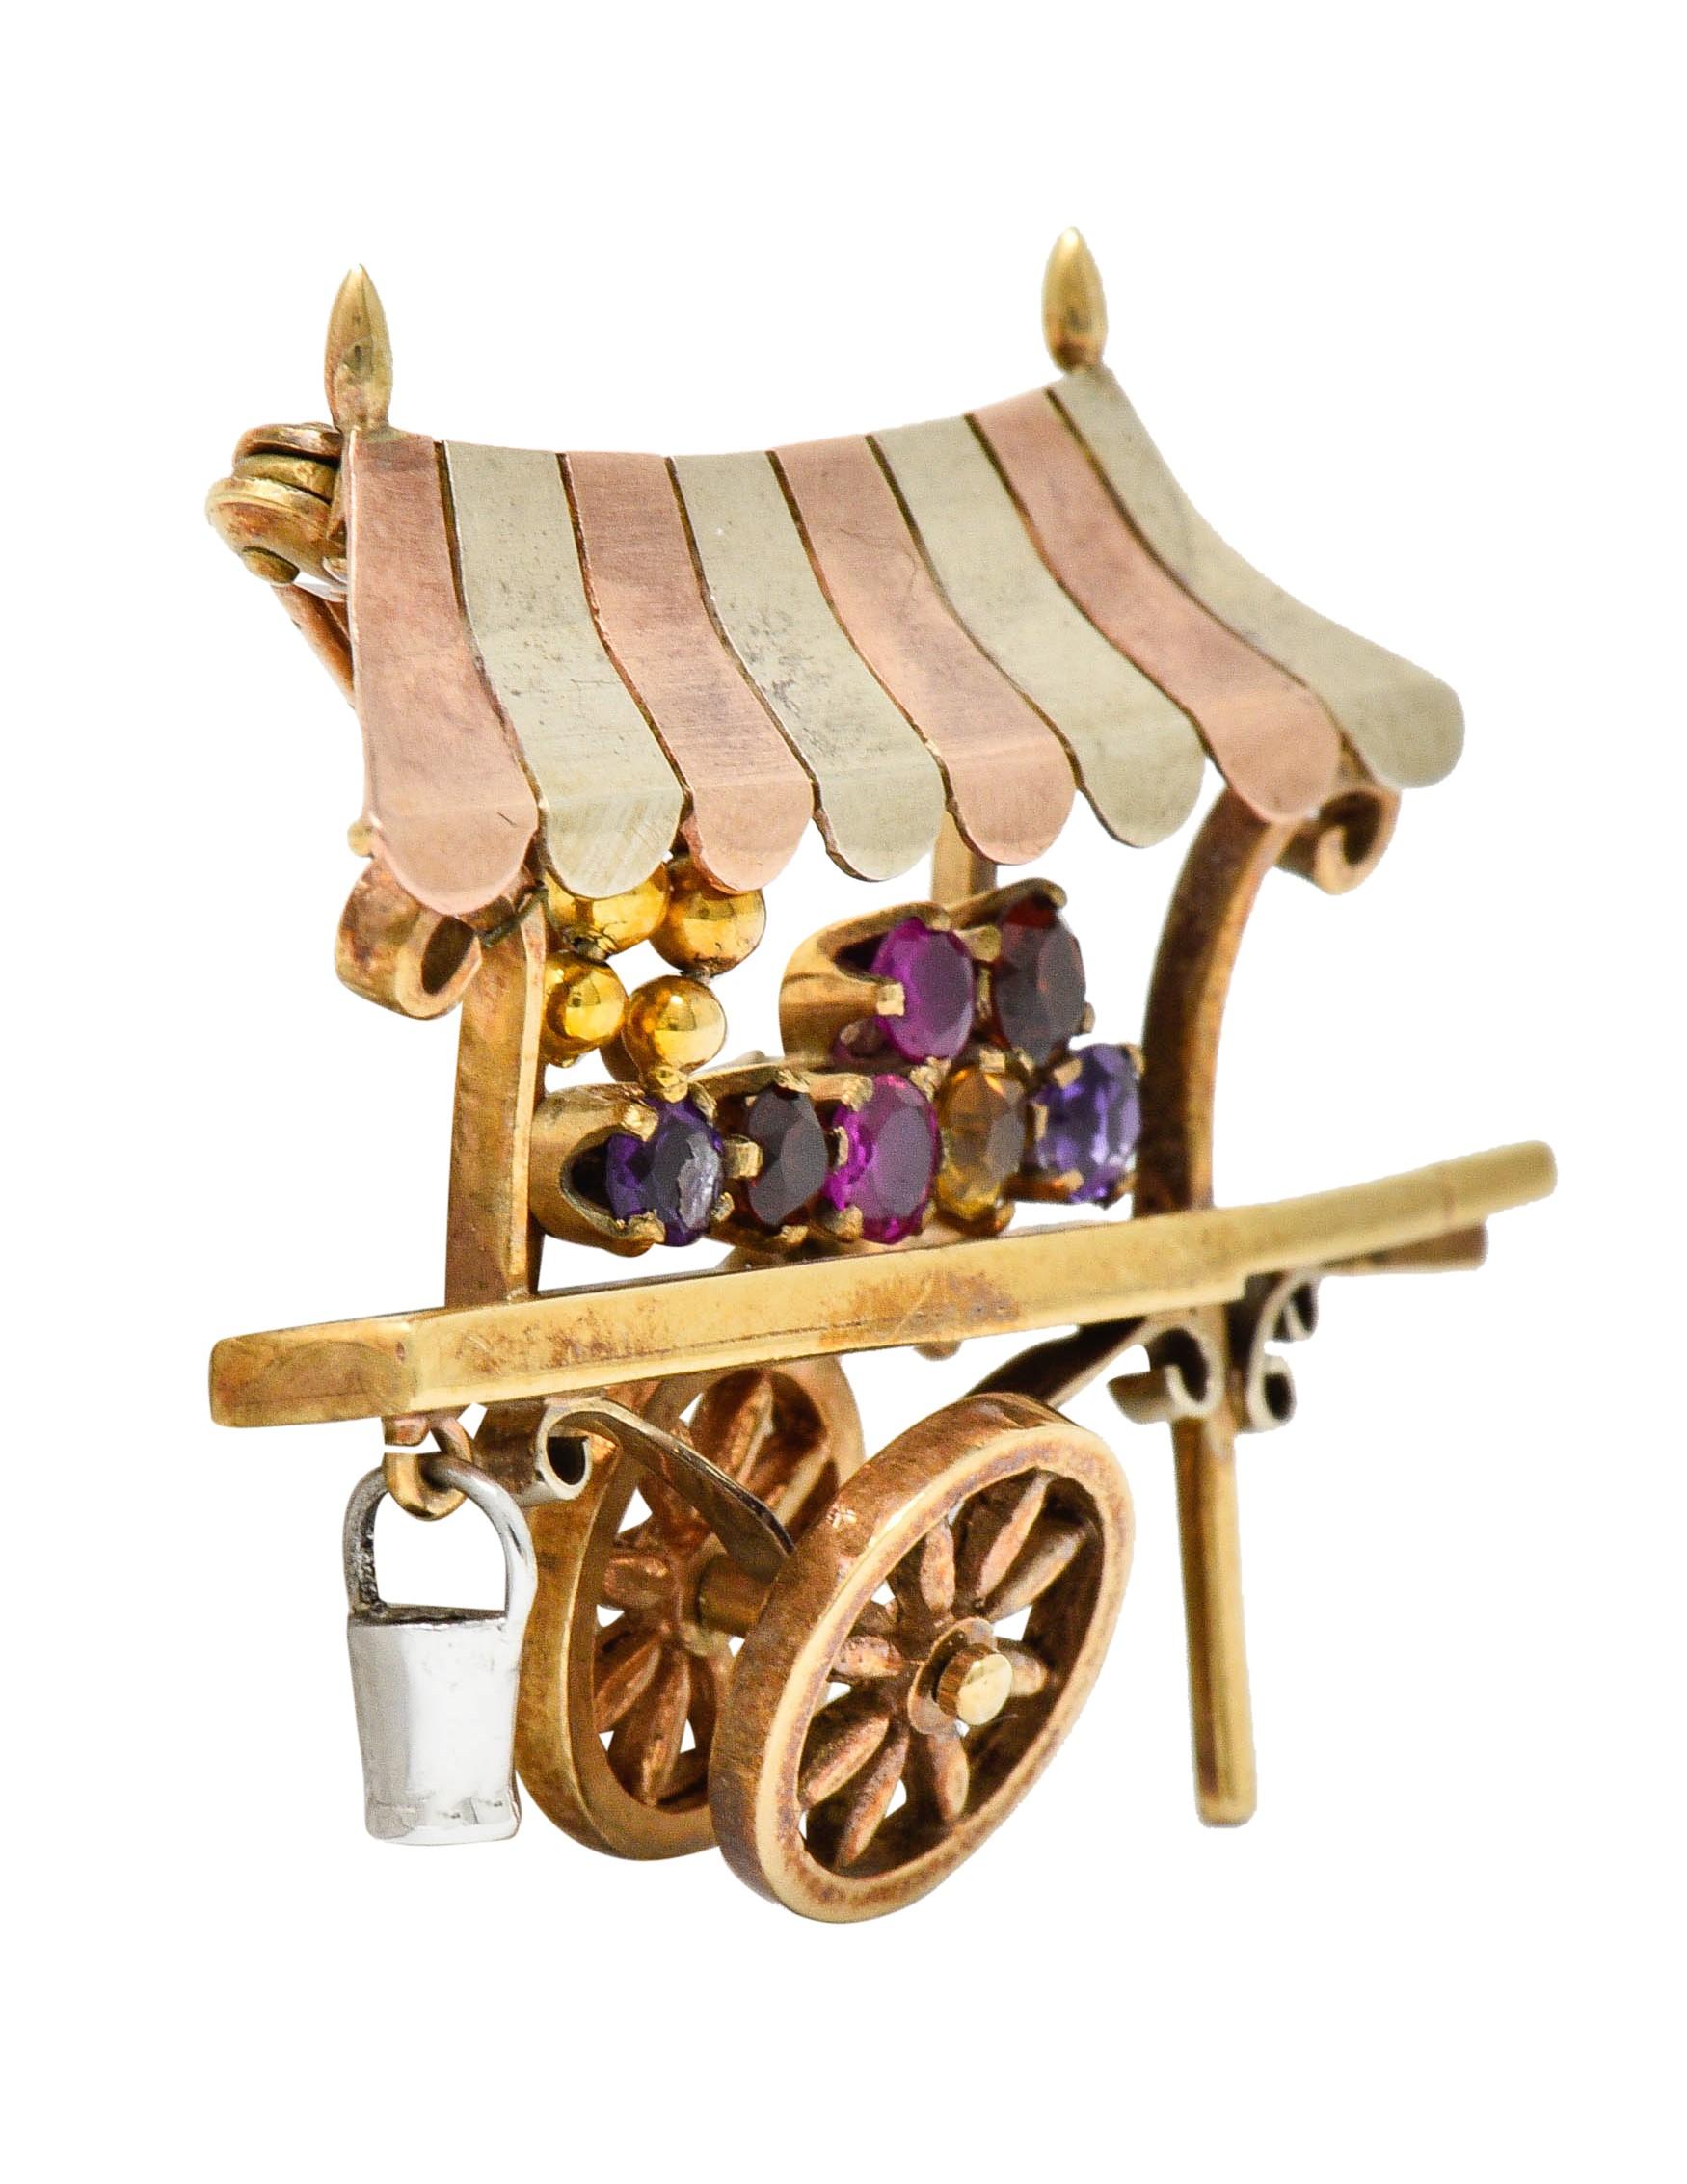 Brooch is designed as a vintage flower cart with a striped awning; rose and white gold

Interactive with an articulated white gold bucket charm and rotating wheels

Accented by colorful gemstone flowers - pink sapphire, garnet, amethyst, and